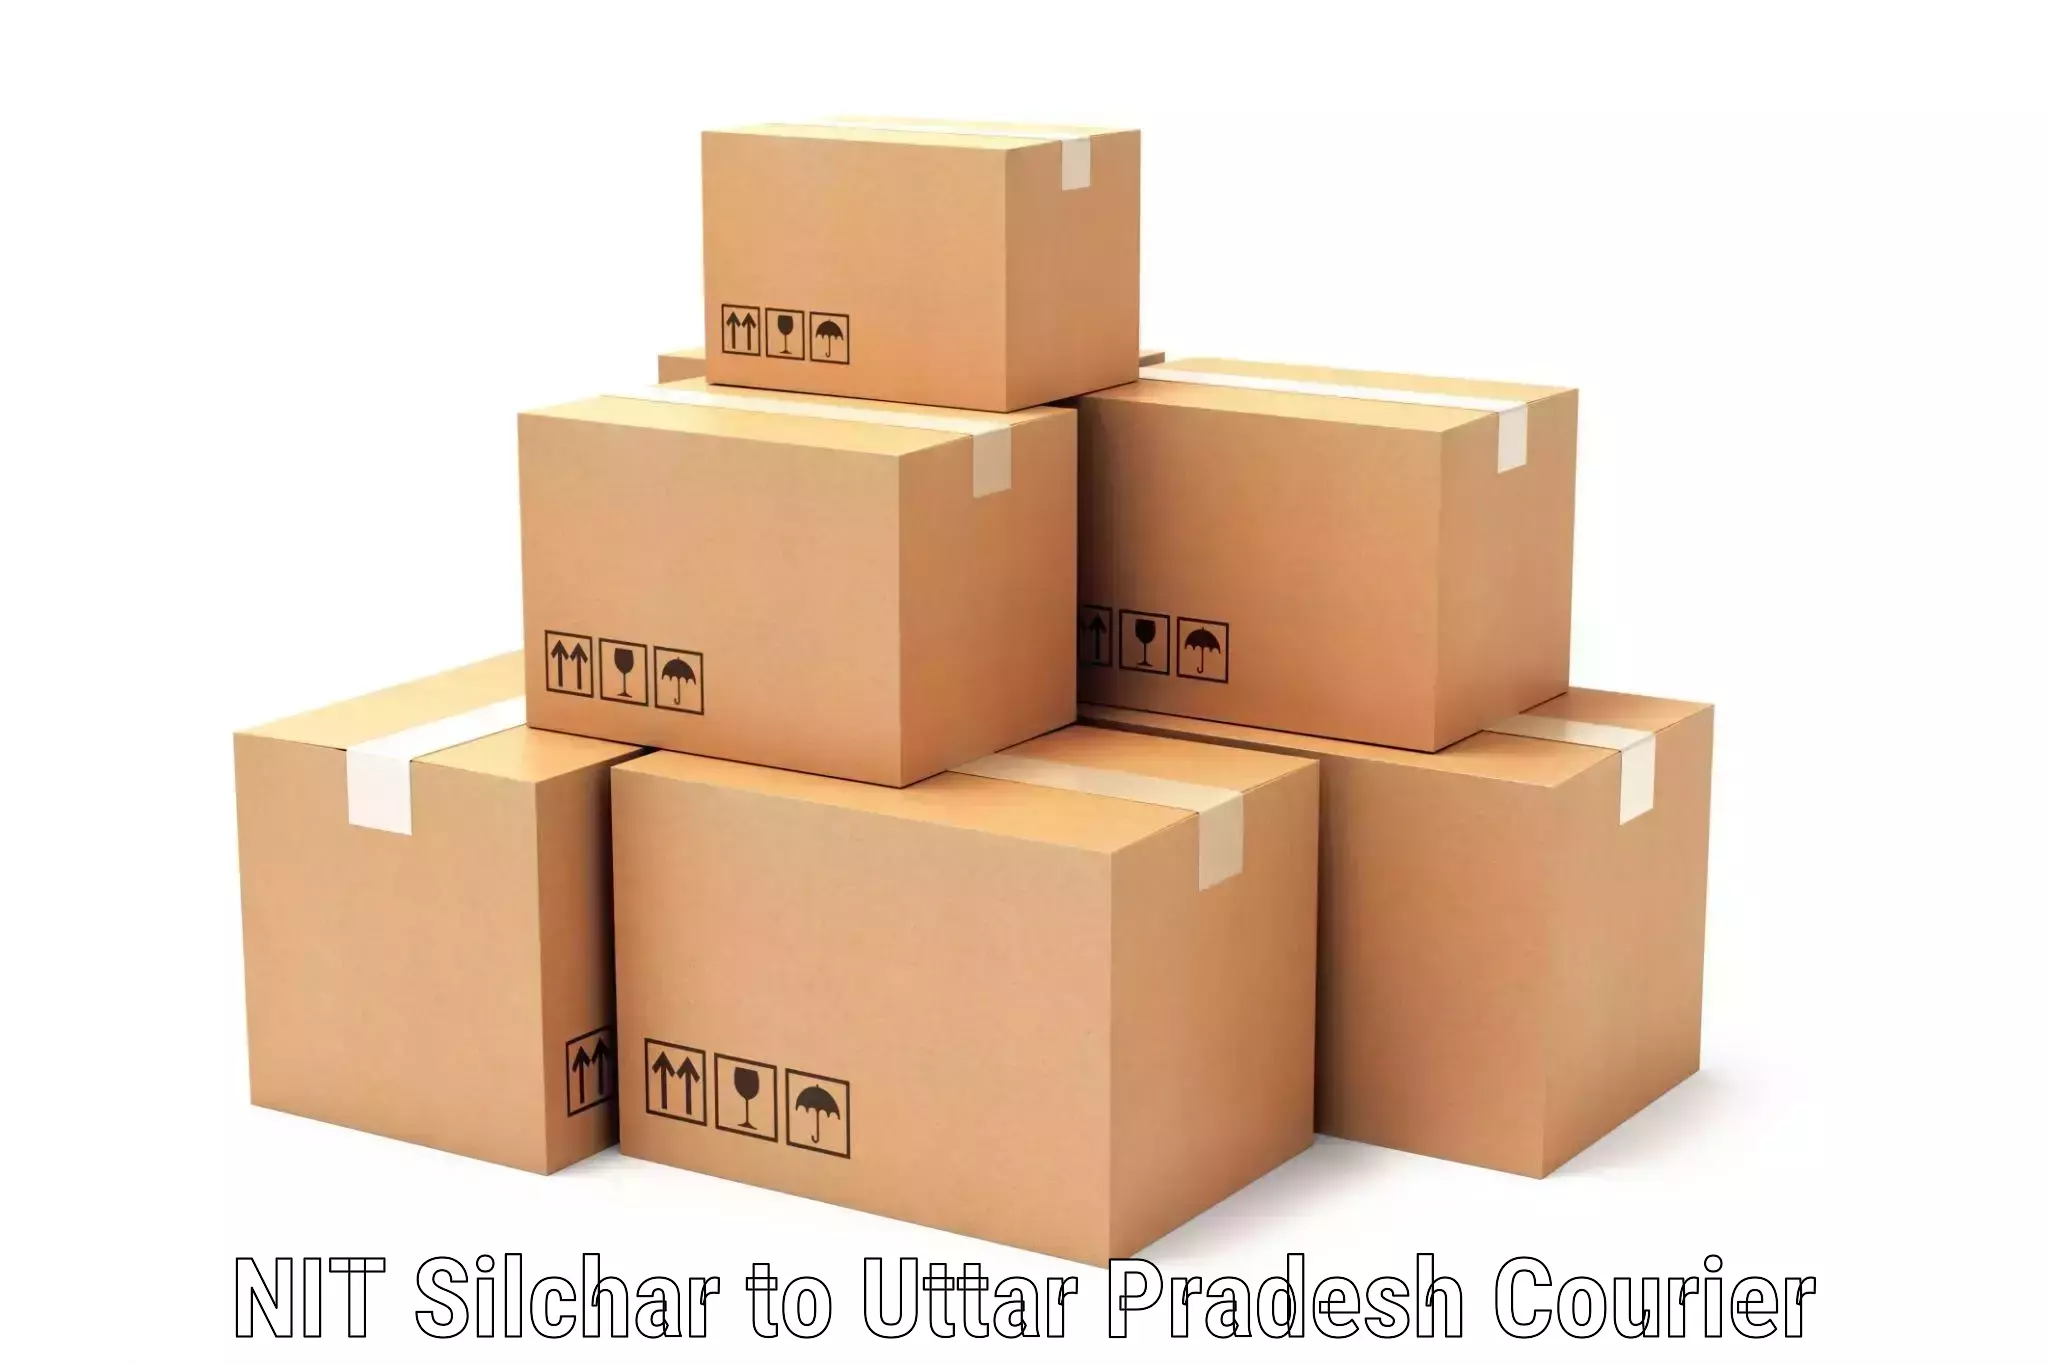 Pharmaceutical courier NIT Silchar to Hathras